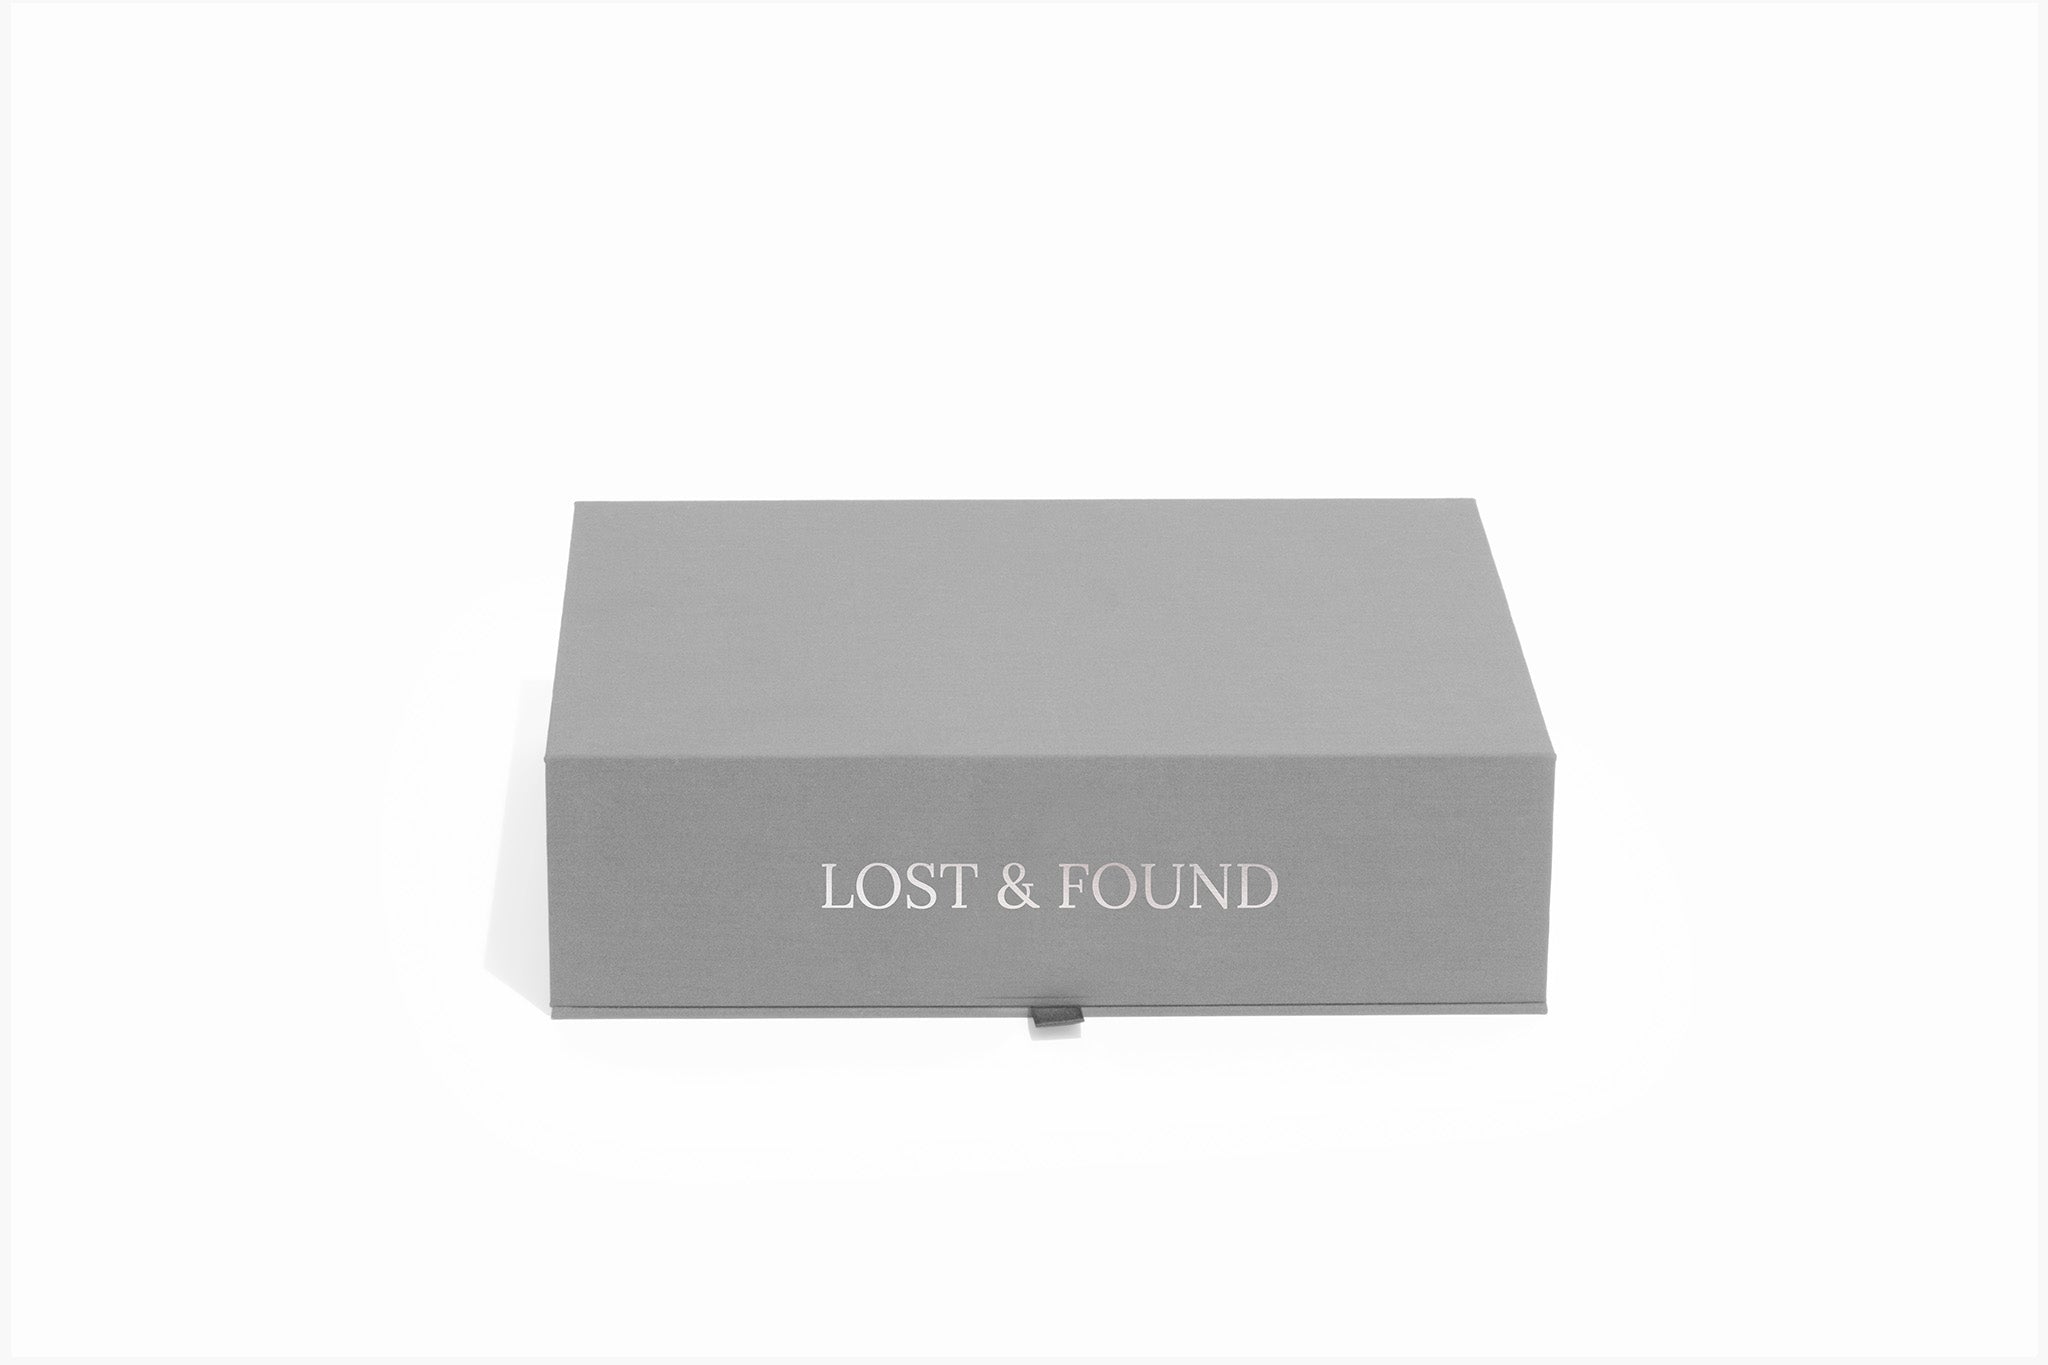 closed slate safe deposit box personalized with Lost and found